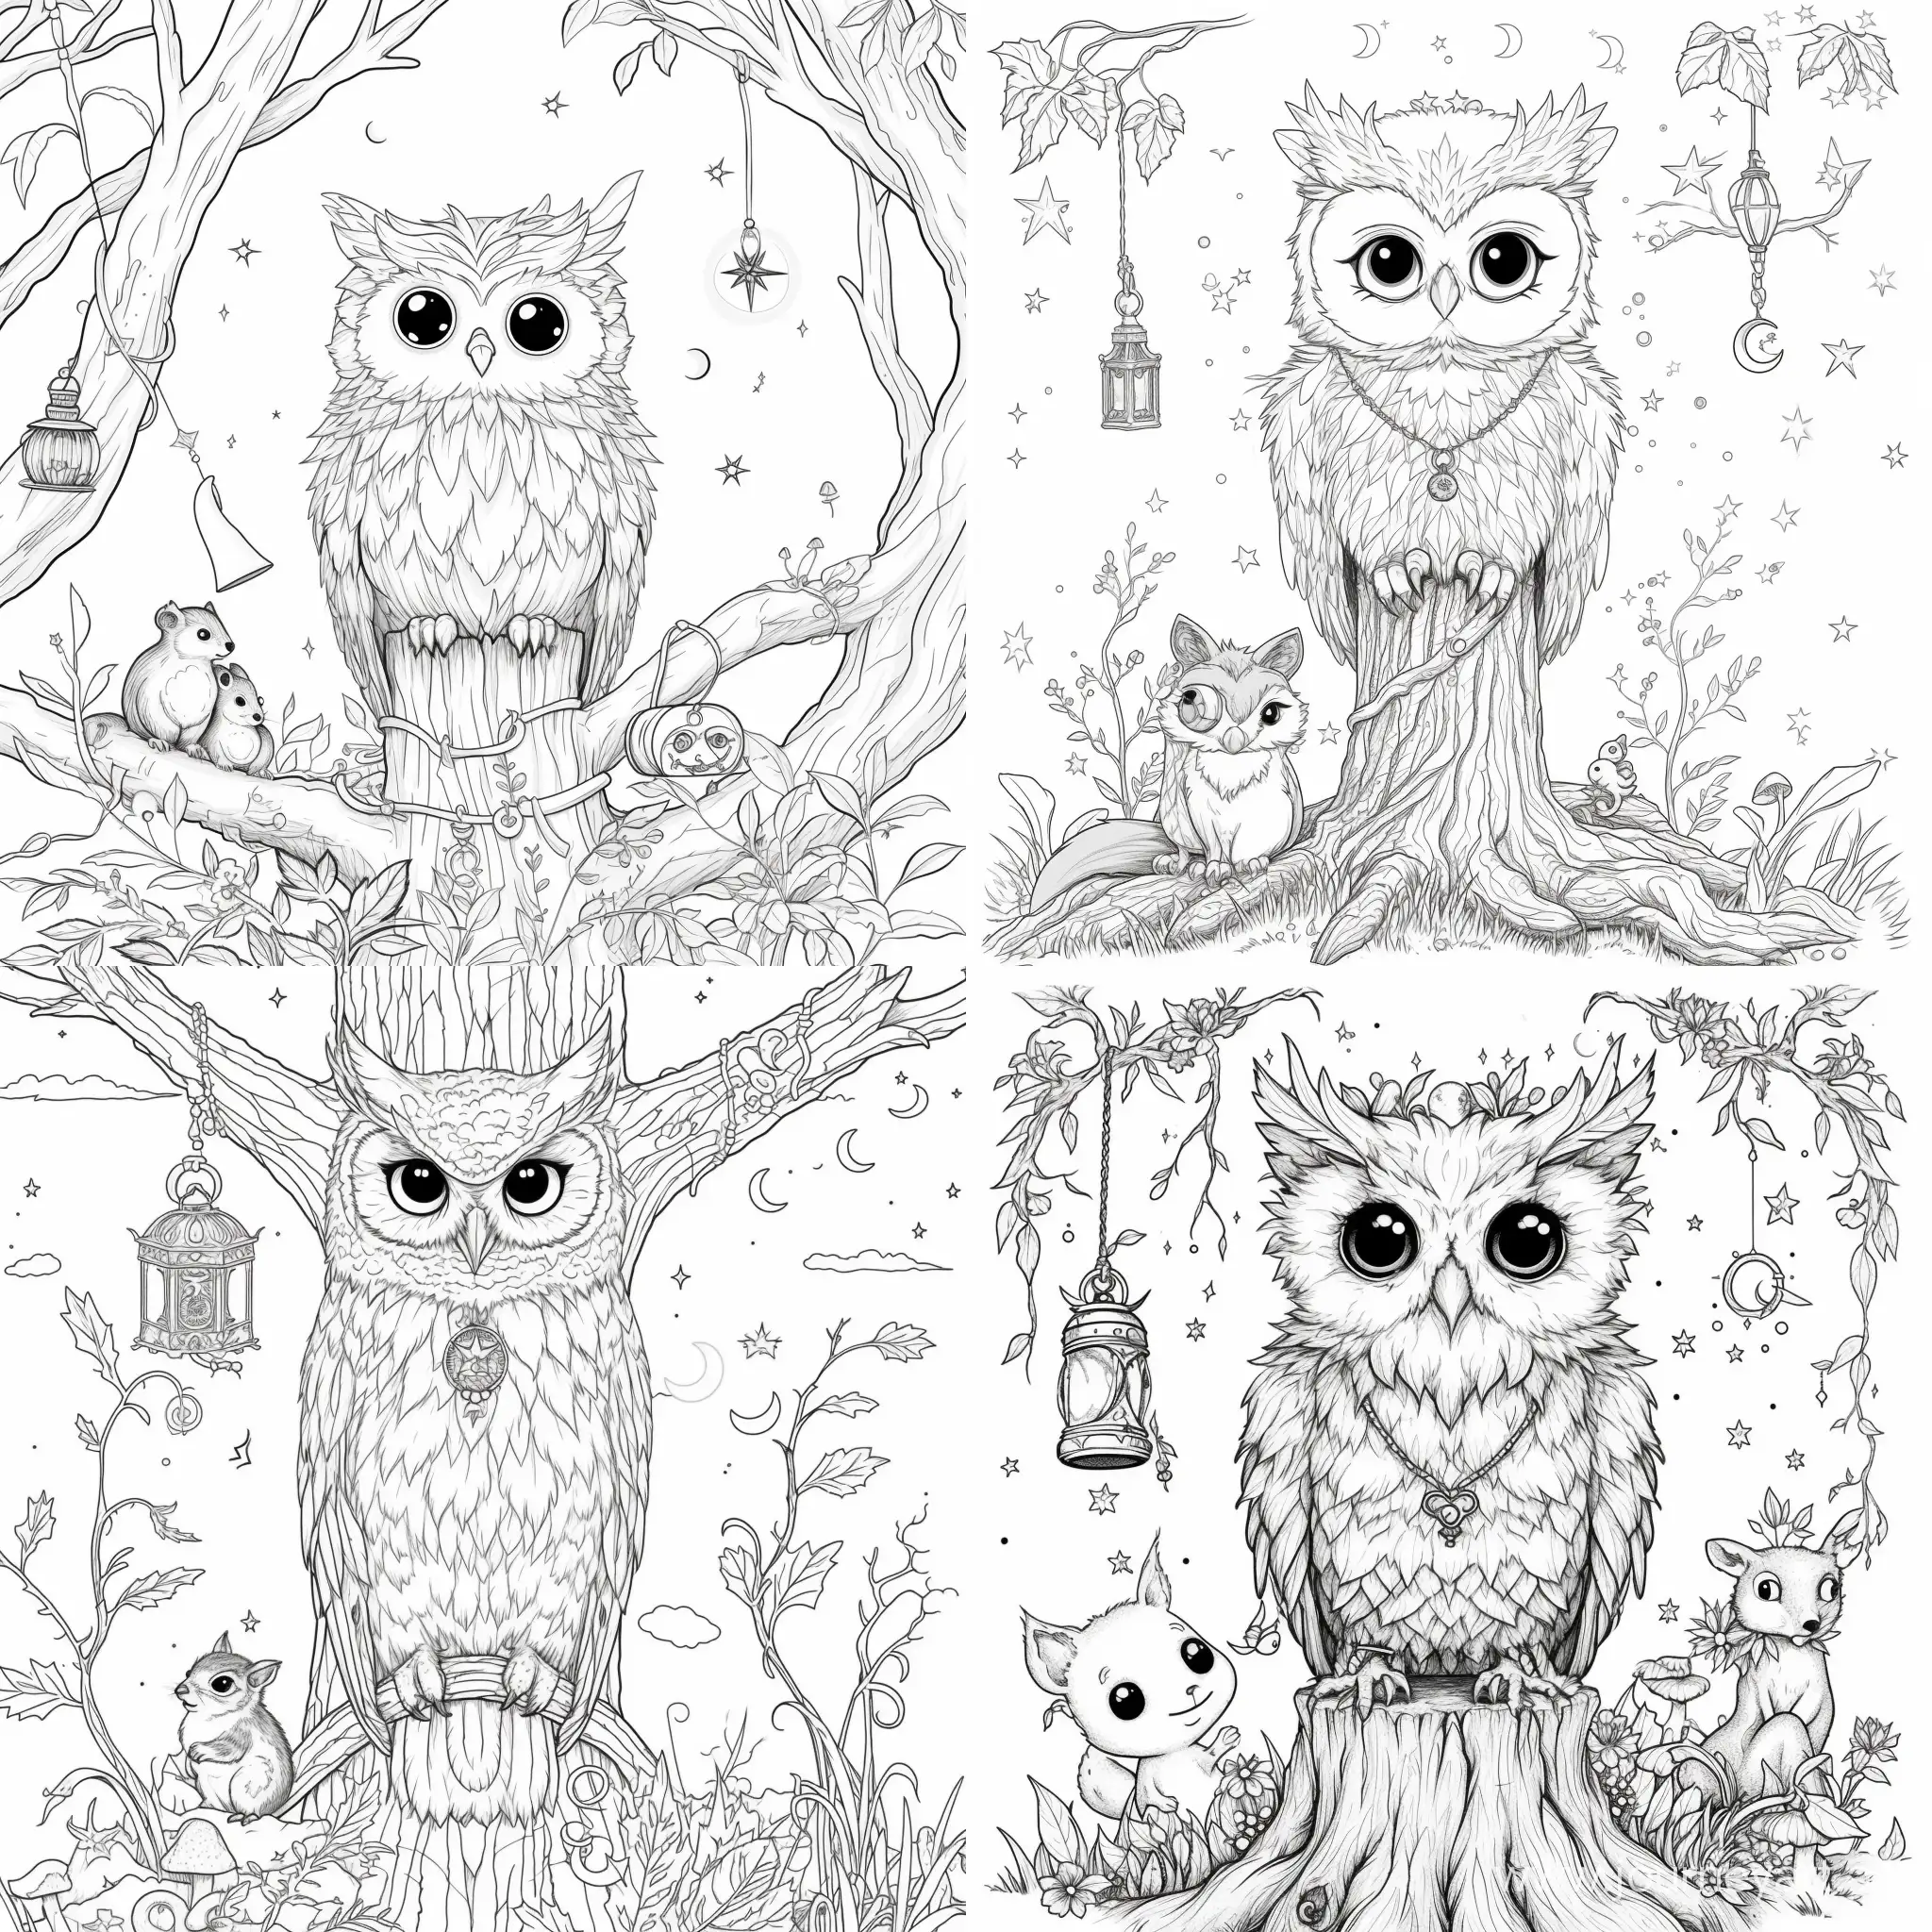 Task: Generate a creative and thought-provoking B/w outline coloring book page illustration art for following Character on Pure white background to give a more authentic look.

Character: Picture a world where a cute owl with adorable eyes. It will sit nicely, with feathers that are fun to color but not too complicated. Place the owl on an ancient, gnarled tree that seems to be as wise and as old as the owl itself. Adorn the owl with accessories that enhance its mystical aura, such as a pendant or a crown made of leaves, stars, moons, or even a small, glowing lantern hanging from its neck.

Incorporate Supporting Elements: Introduce small creatures or enchanted plants around the owl, like a curious squirrel, a friendly fox, or glowing mushrooms and flowers, to create a lively scene that invites exploration. Add whimsical patterns to the owl's feathers, such as spirals, stars, and moons, to make the coloring experience more engaging and allow for creative expression. The artwork should capture the required essence of the atmosphere or environment, and the beauty of the natural surroundings. 

Composition Instructions: Well composed, clean and strong outline art, storybook illustration, 8k resolution similar. No color. No dither, no gradient, No fill, No solids, no shadow, no noise, no shade. The overall layout should be balanced, and well-aligned accordingly. Ensure the final artwork edges not cut off or side off. This composition goal is both visually appealing and aesthetically pleasing.